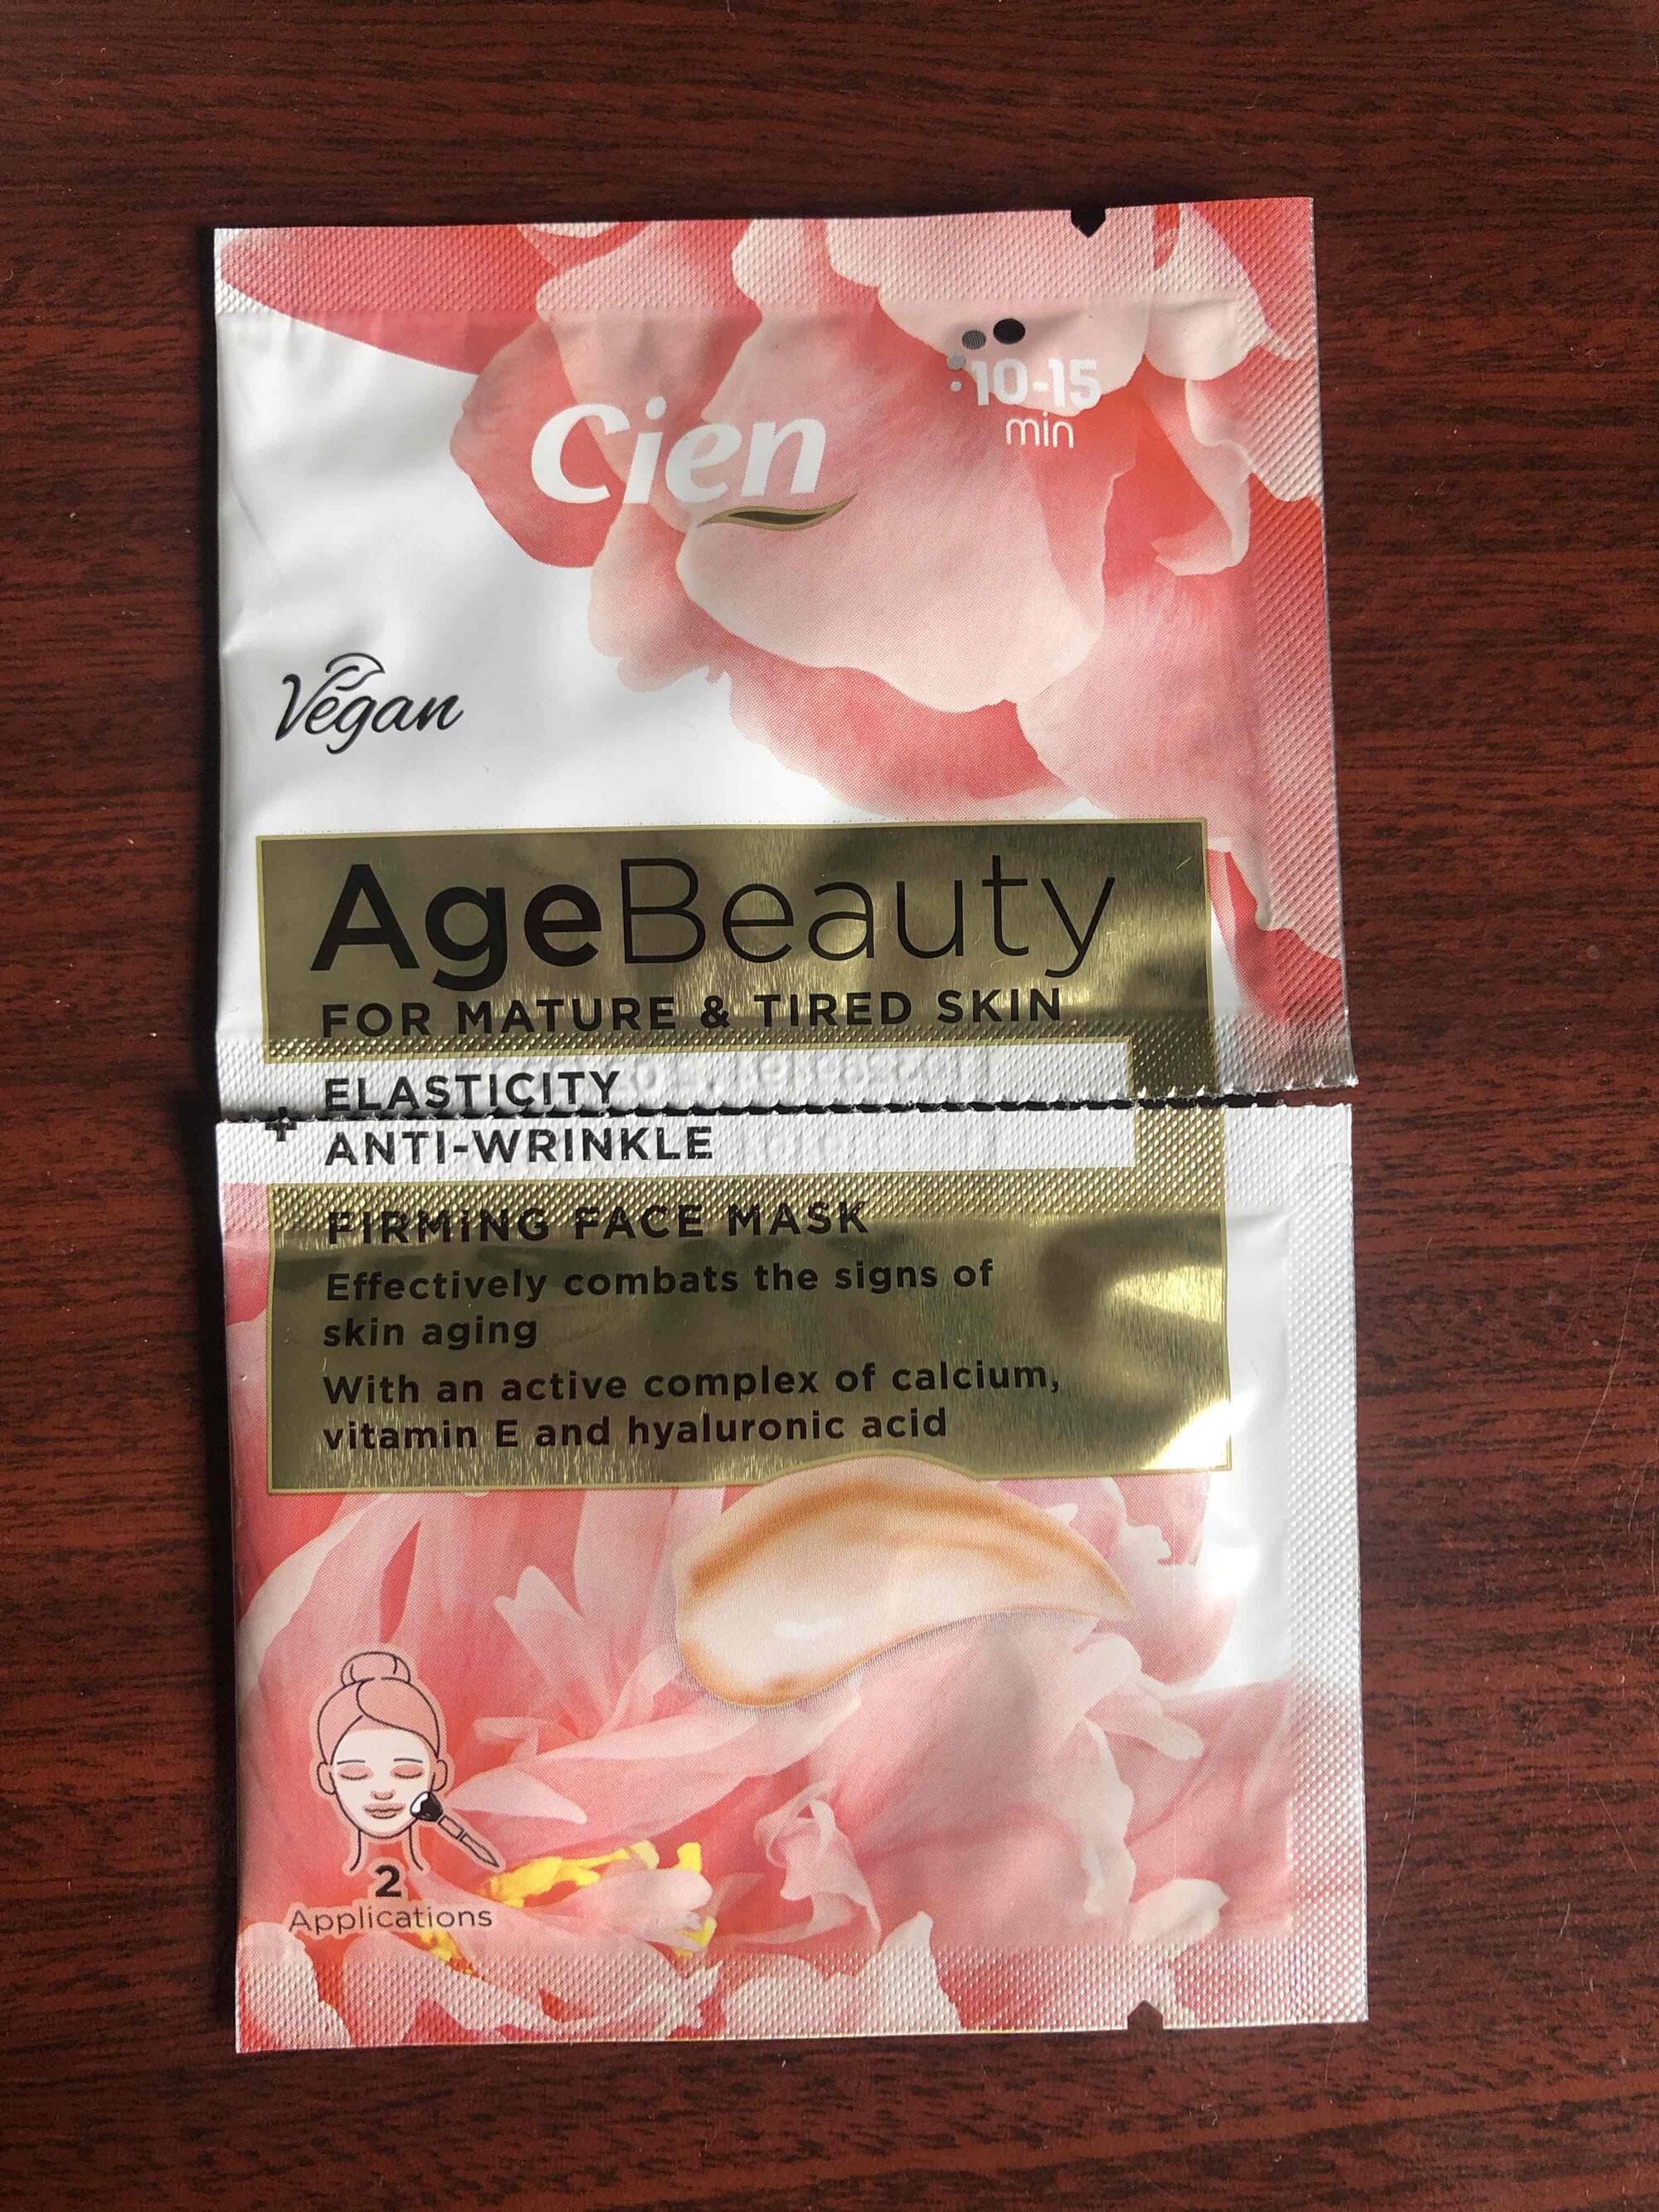 CIEN - AgeBeauty - Firming face mask anti-wrinkle